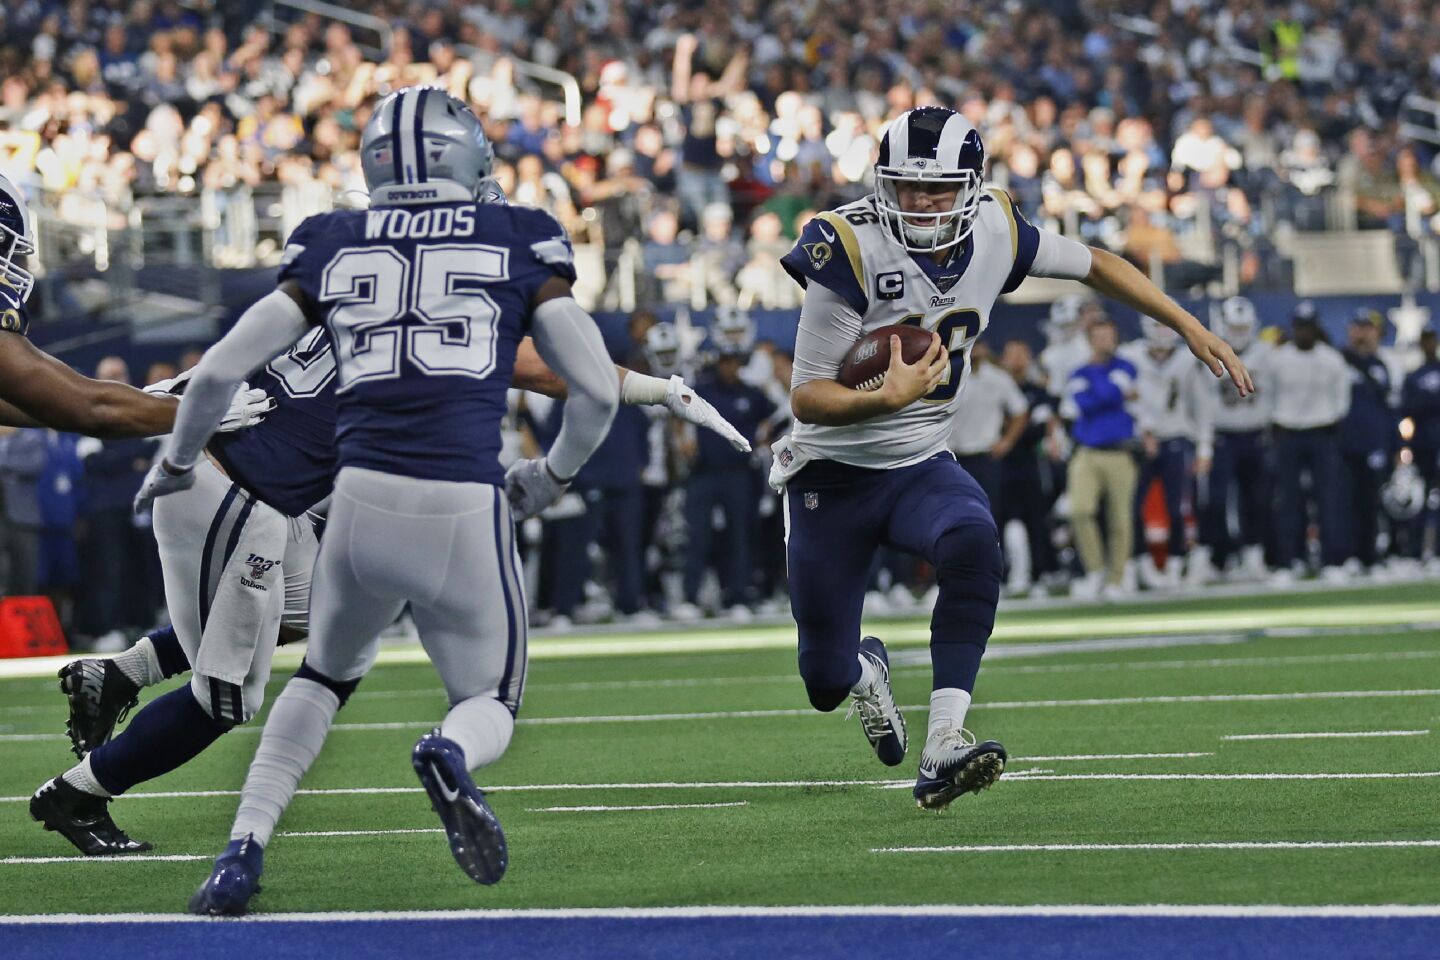 Rams quarterback Jared Goff is stopped short of the goal line by Dallas Cowboys outside linebacker Sean Lee, left, as safety Xavier Woods moves in.